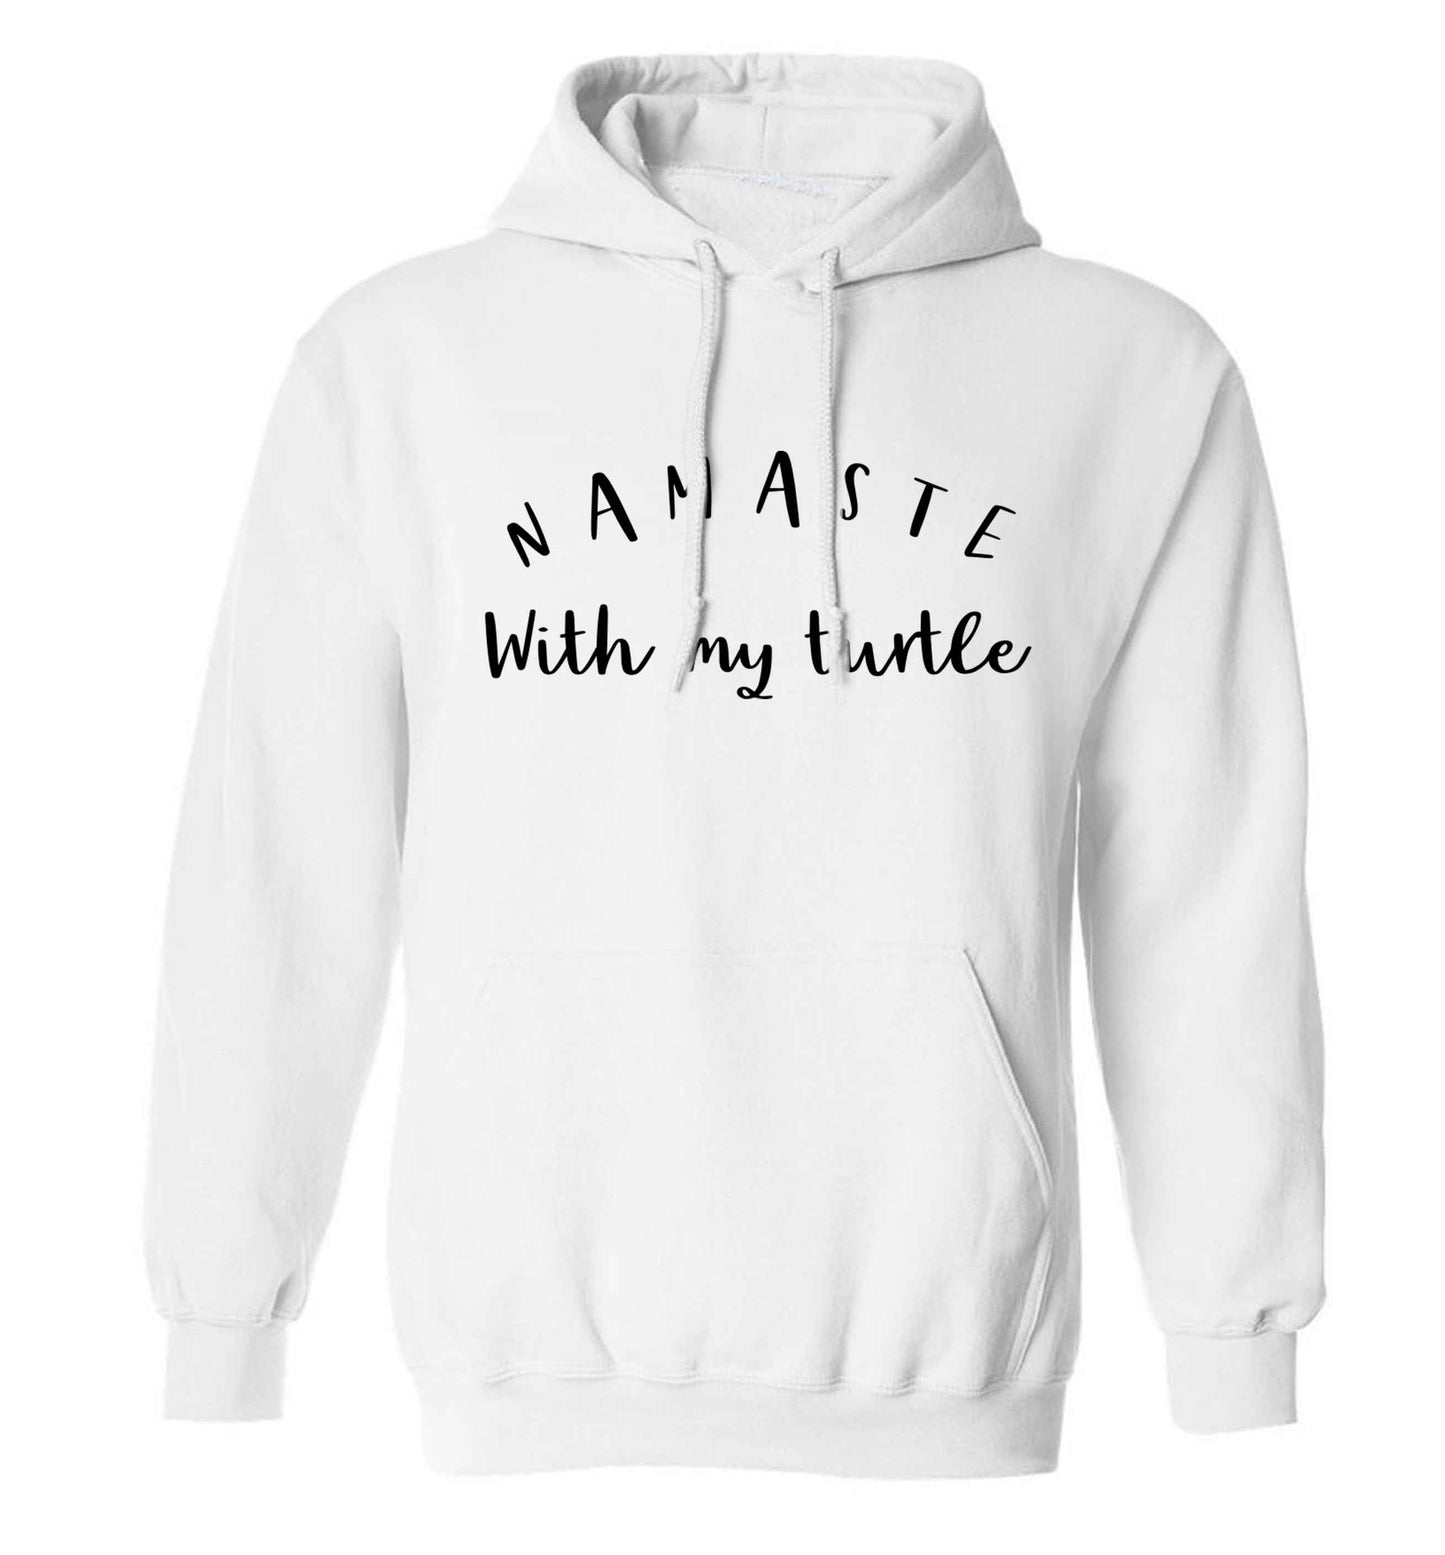 Namaste with my turtle adults unisex white hoodie 2XL